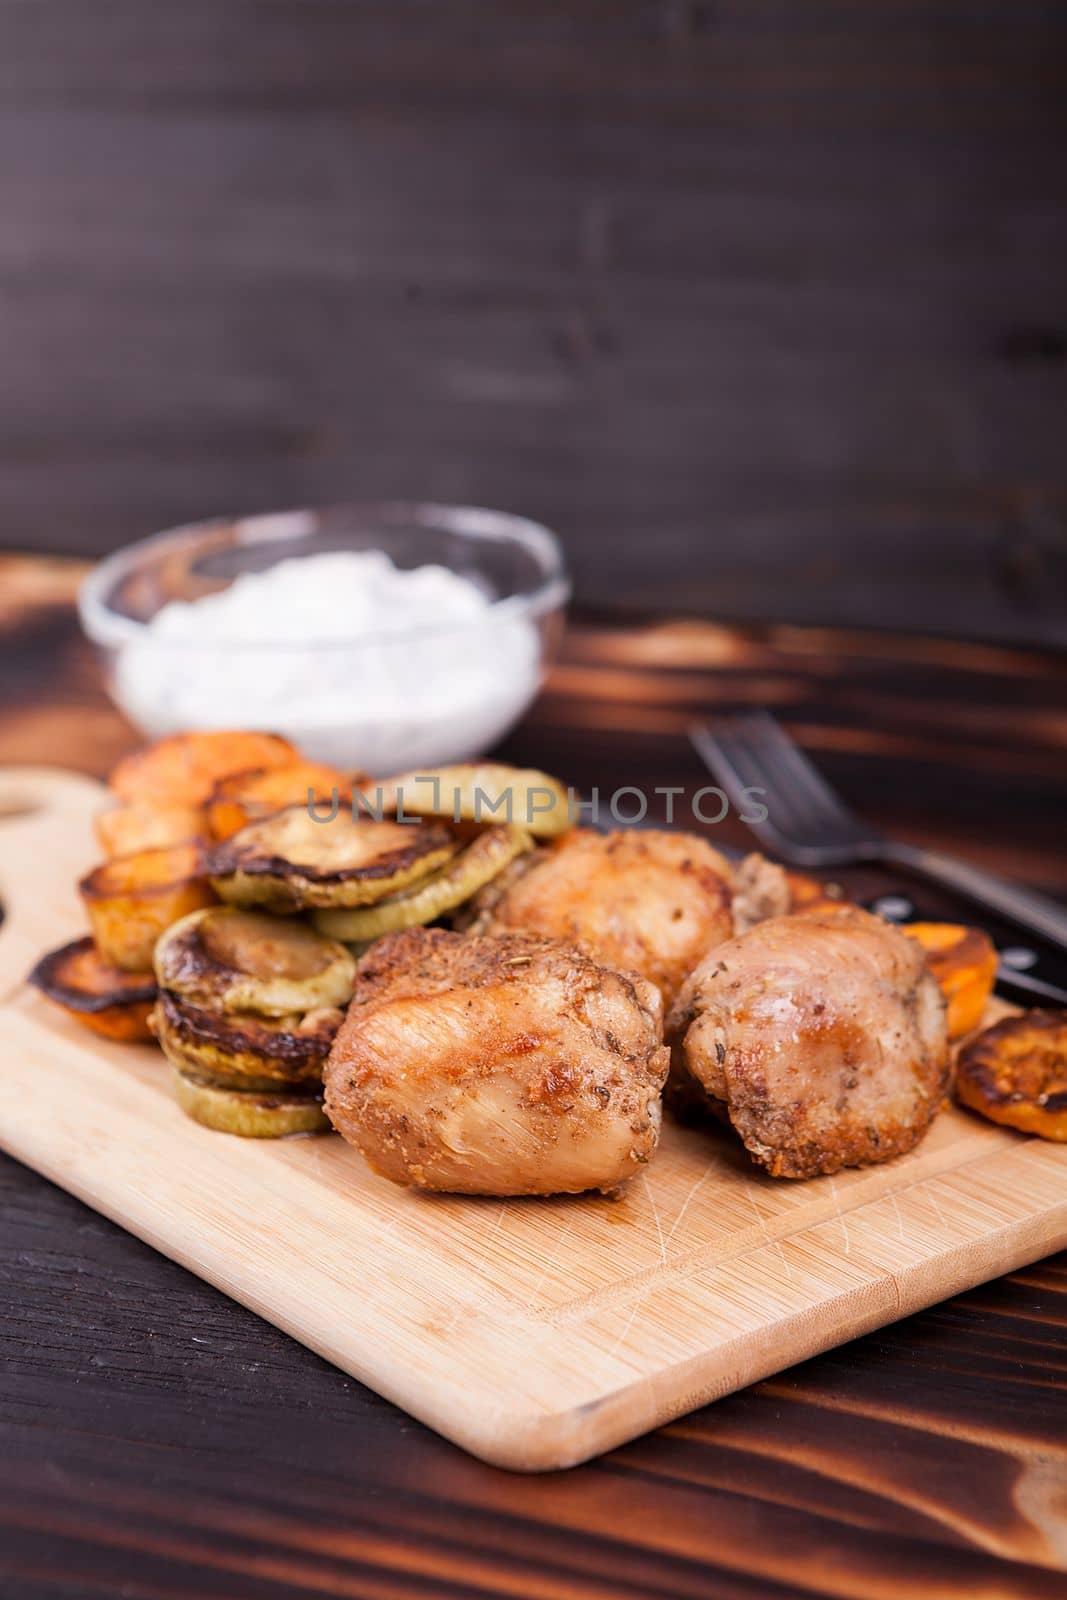 Grilled chicken next to fried zucchini and sweet potatoes by DCStudio